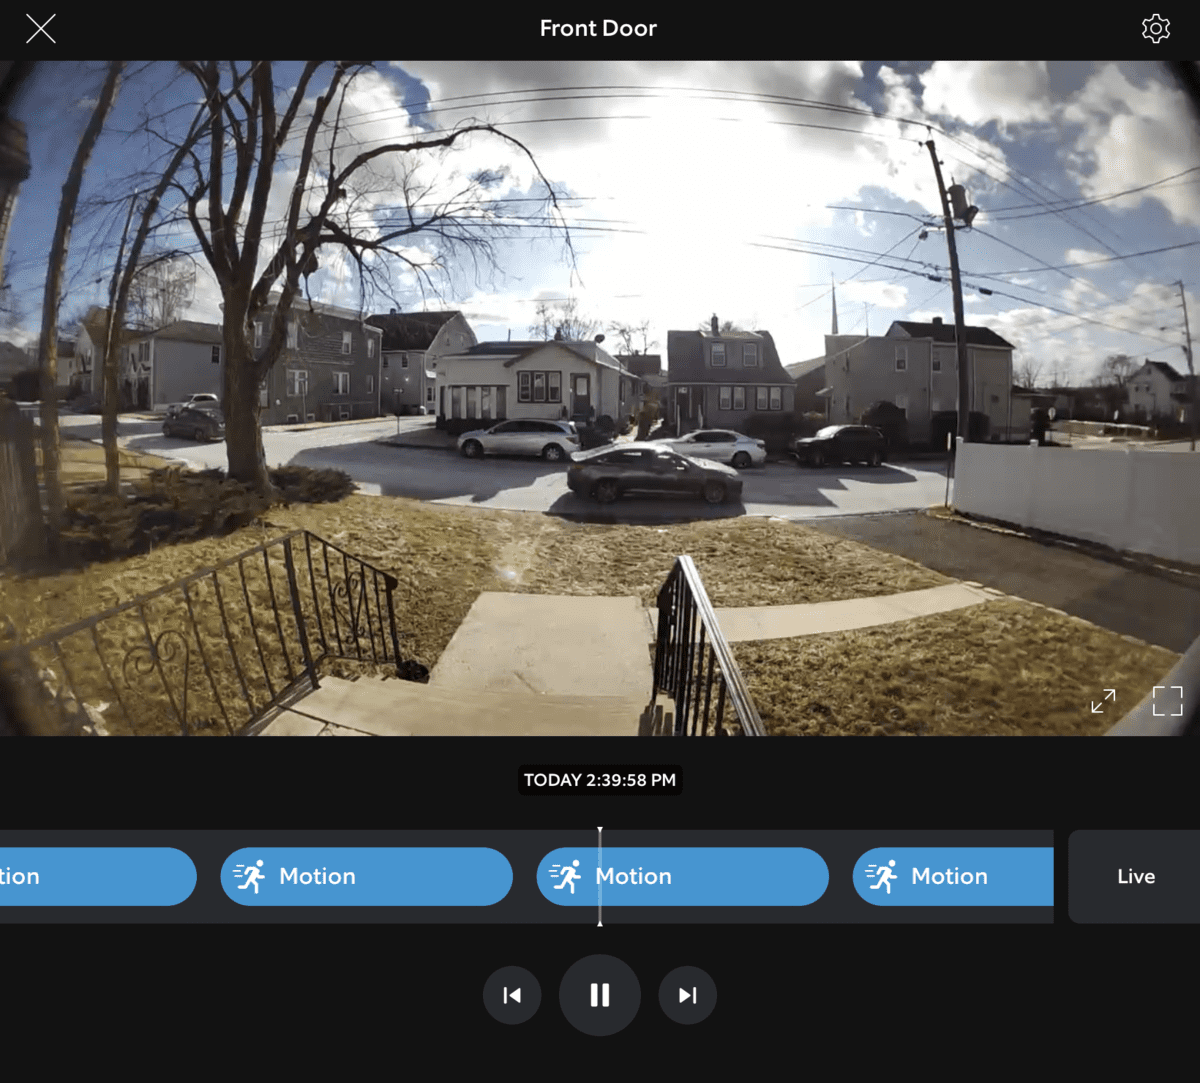 https://www.smarthomepoint.com/wp-content/uploads/2022/02/Car-Driving-by-in-Daytime-on-Ring-Video-Doorbell-e1644178921636.png